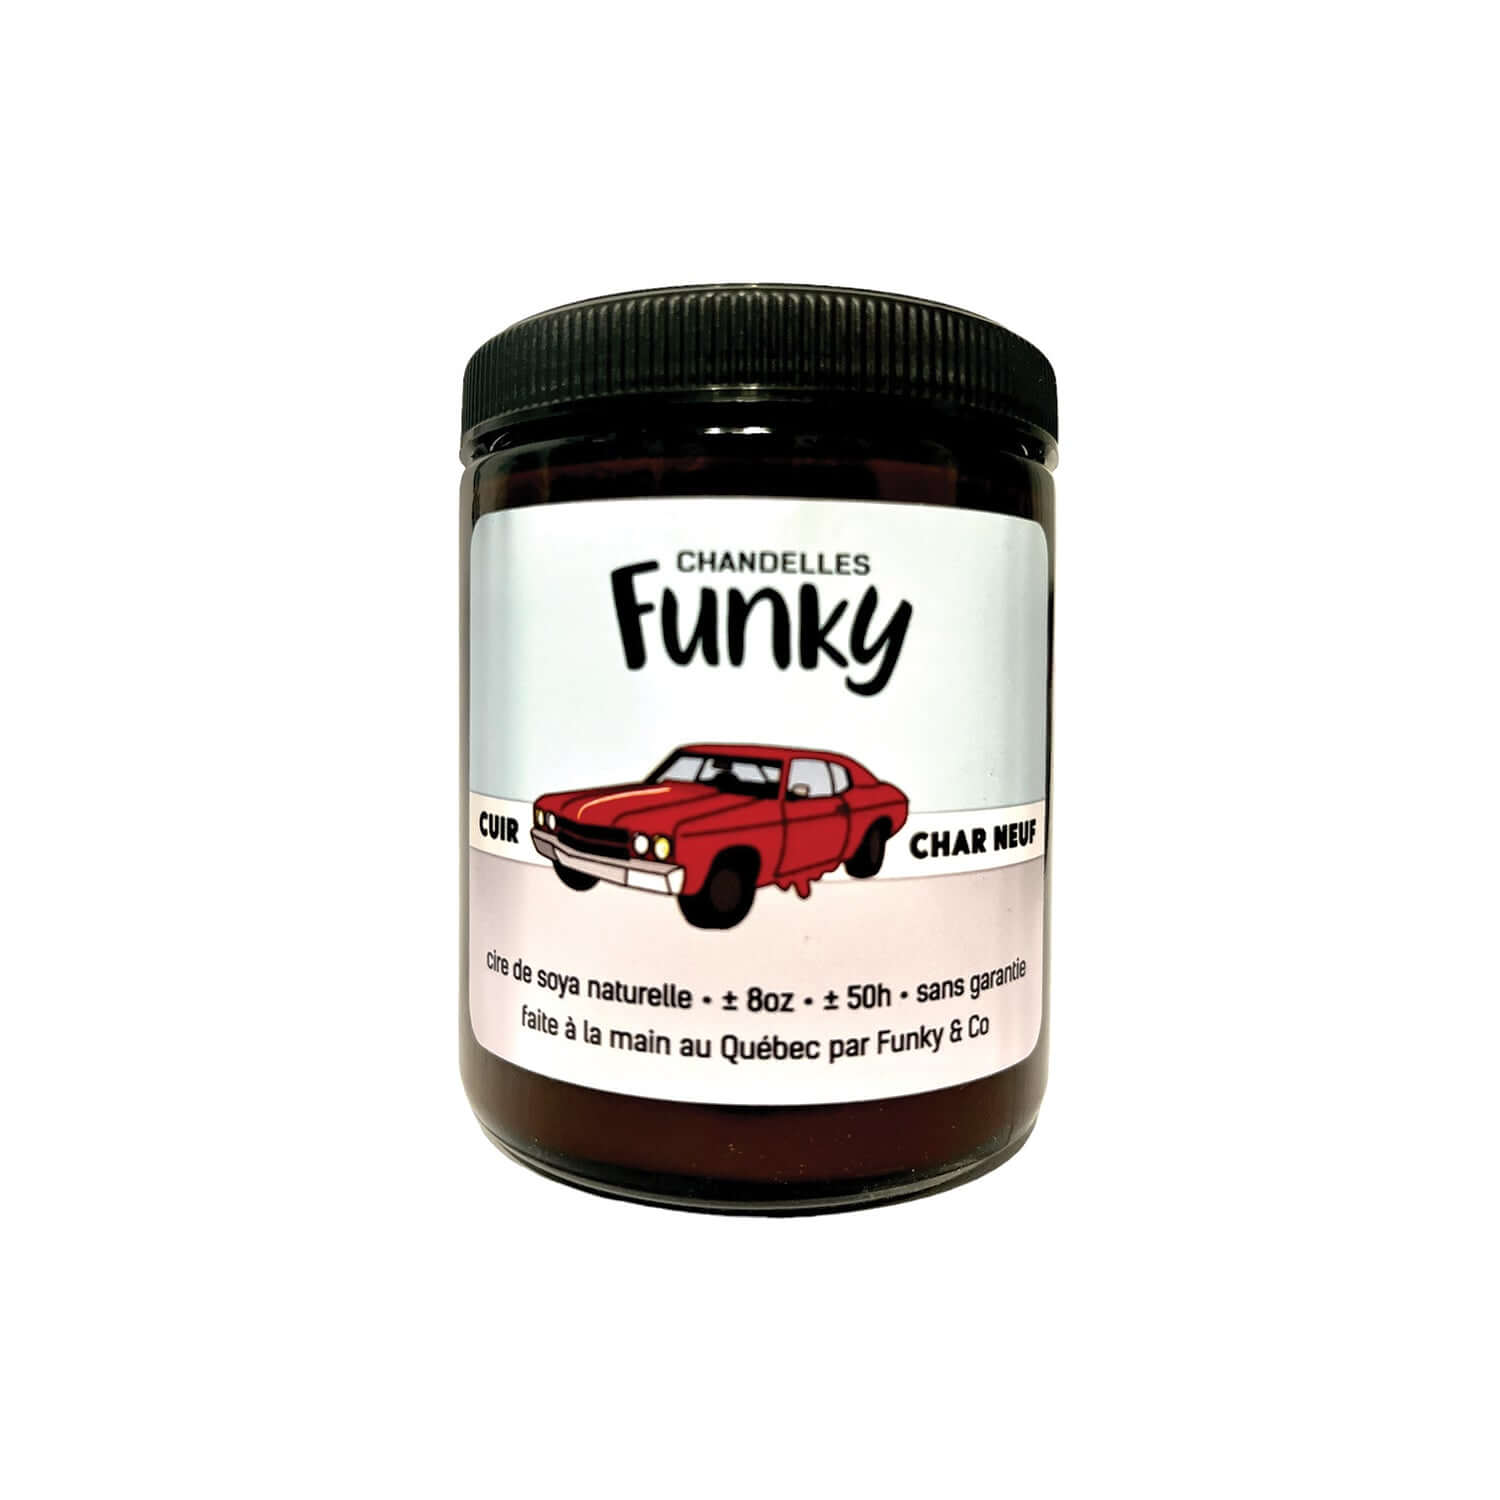 Funky candles - Char Neuf